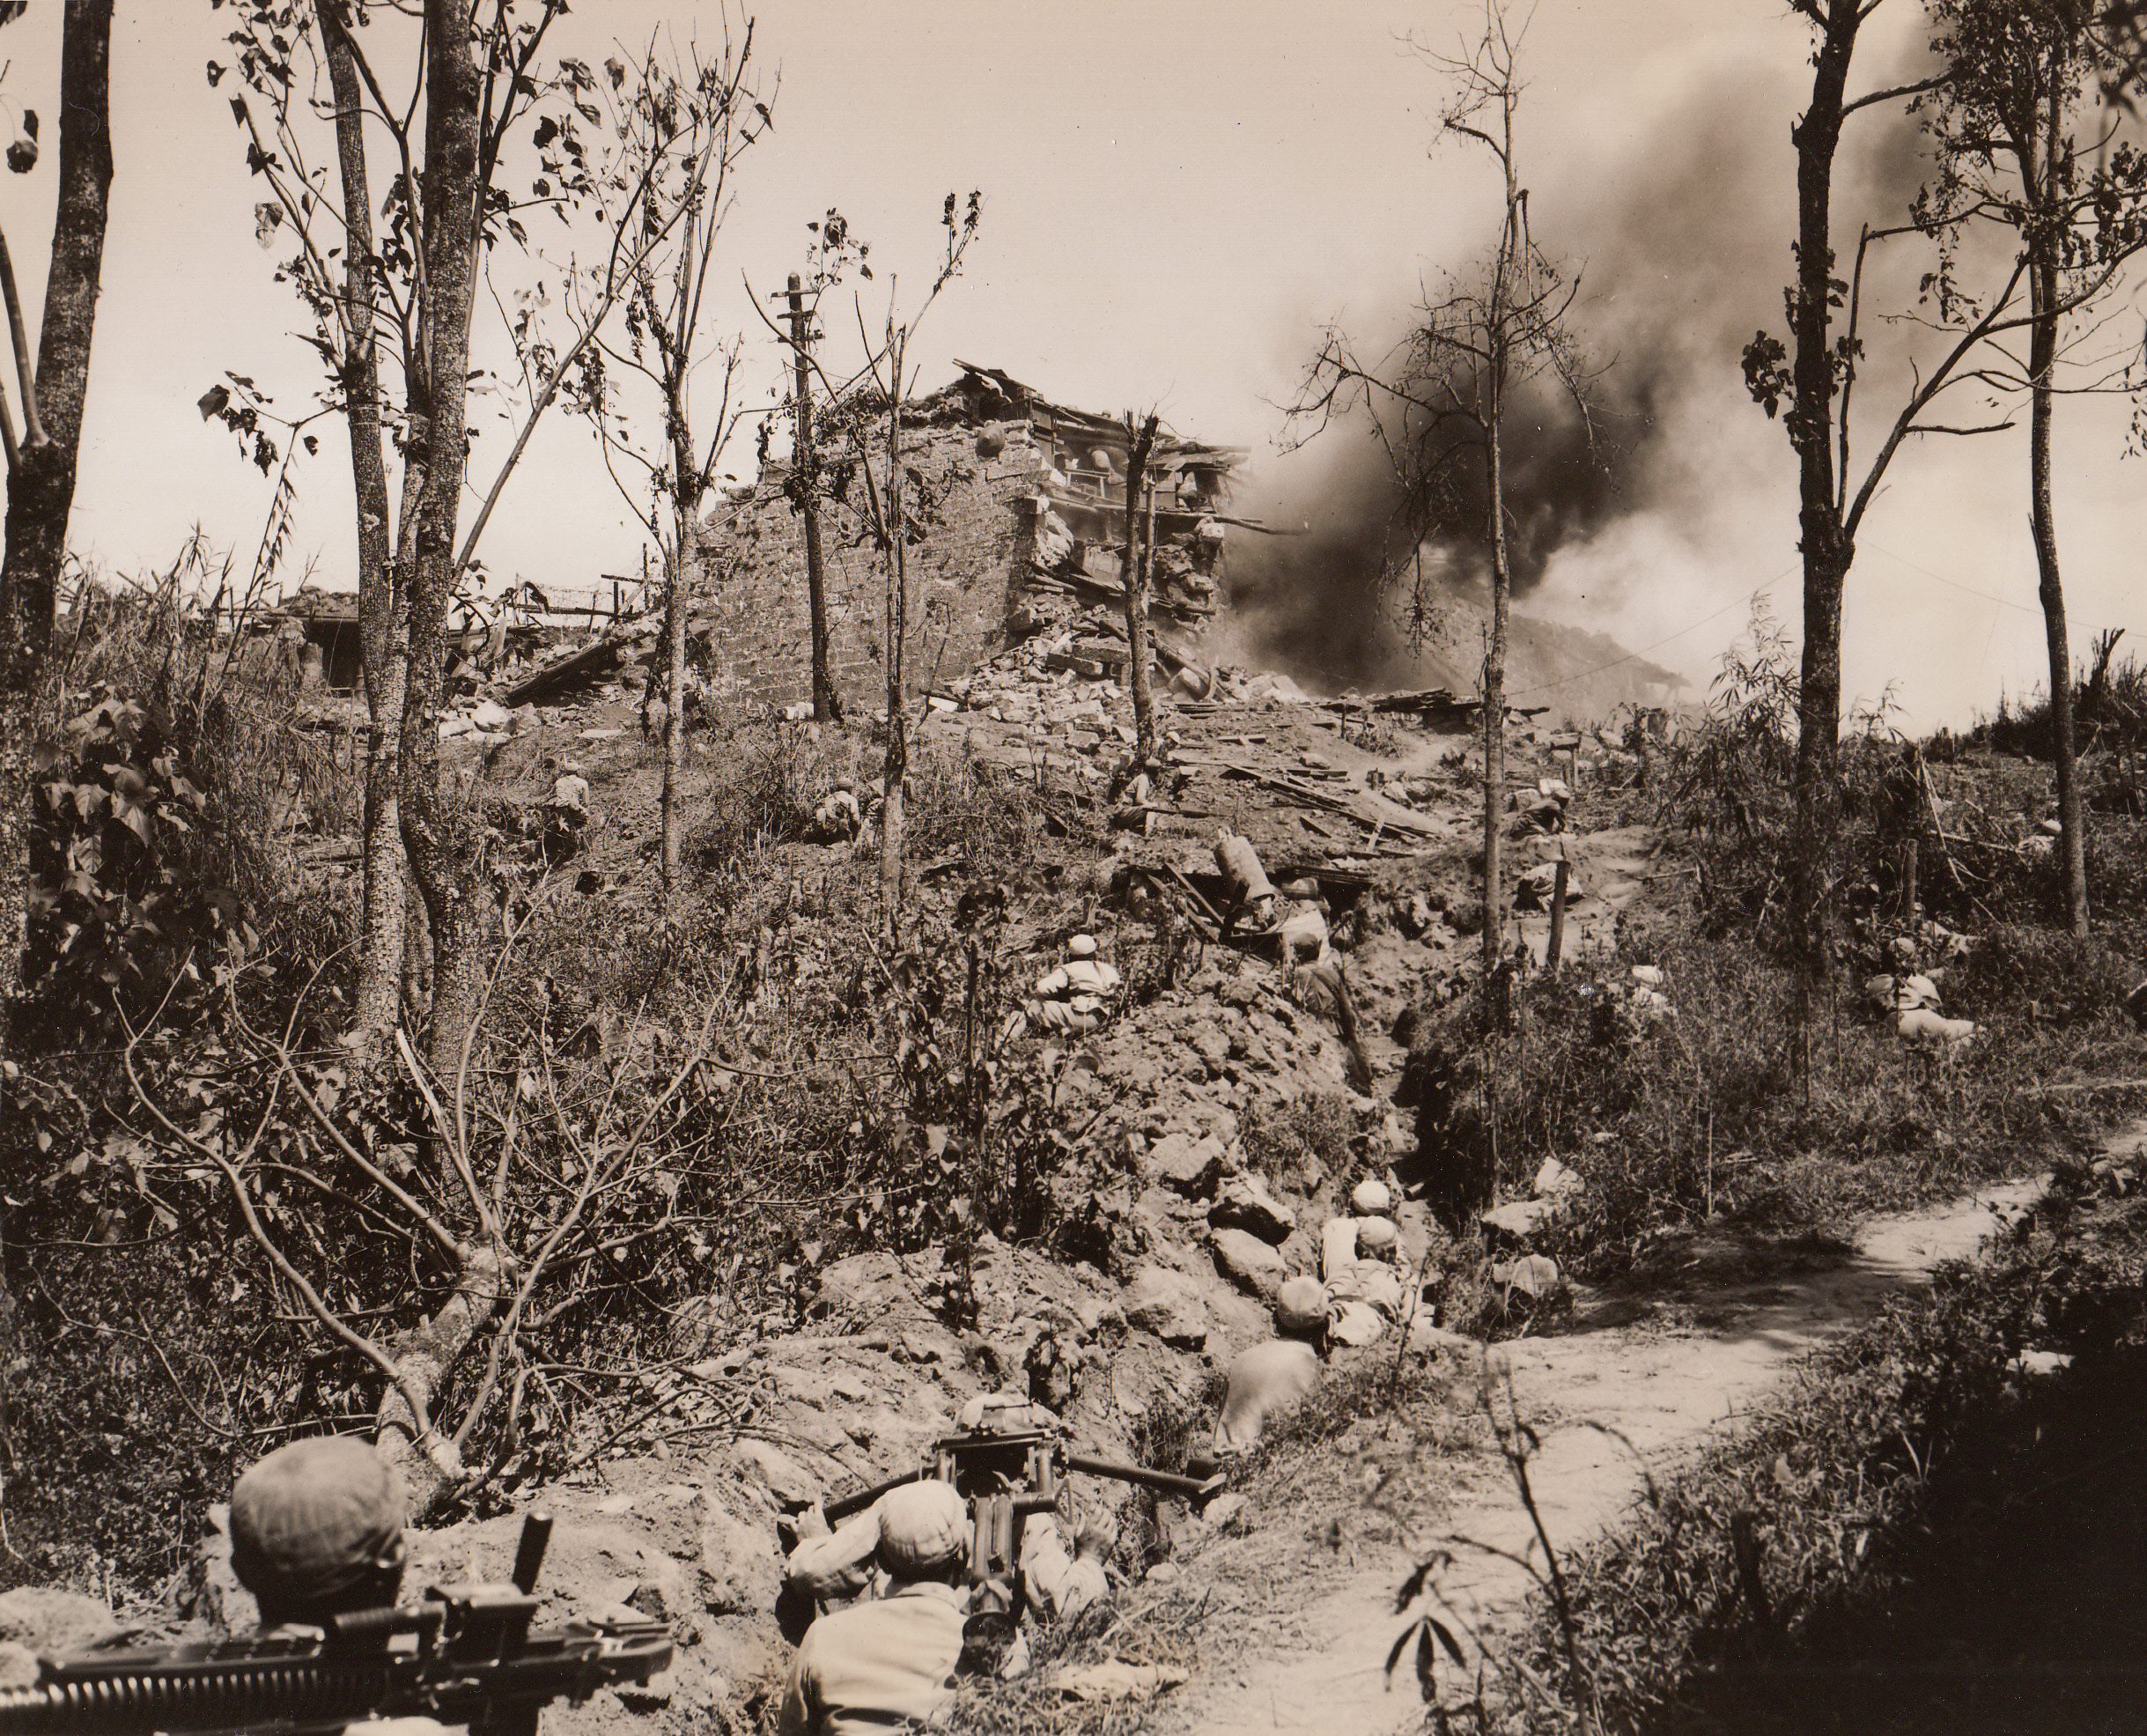 Tengchung Captured from Japs – (#3), 10/4/1944. China – The first city east of Burma to be liberated by the Allies, the ancient jade center of Tengchung has been captured from the Japs after five bloody weeks of fighting. Here, (foreground), Chinese troops wait to move up on the city’s wall, as engineers blast holes through the 20-foot-thick barricade (background). The smoke is from exploding charges.;